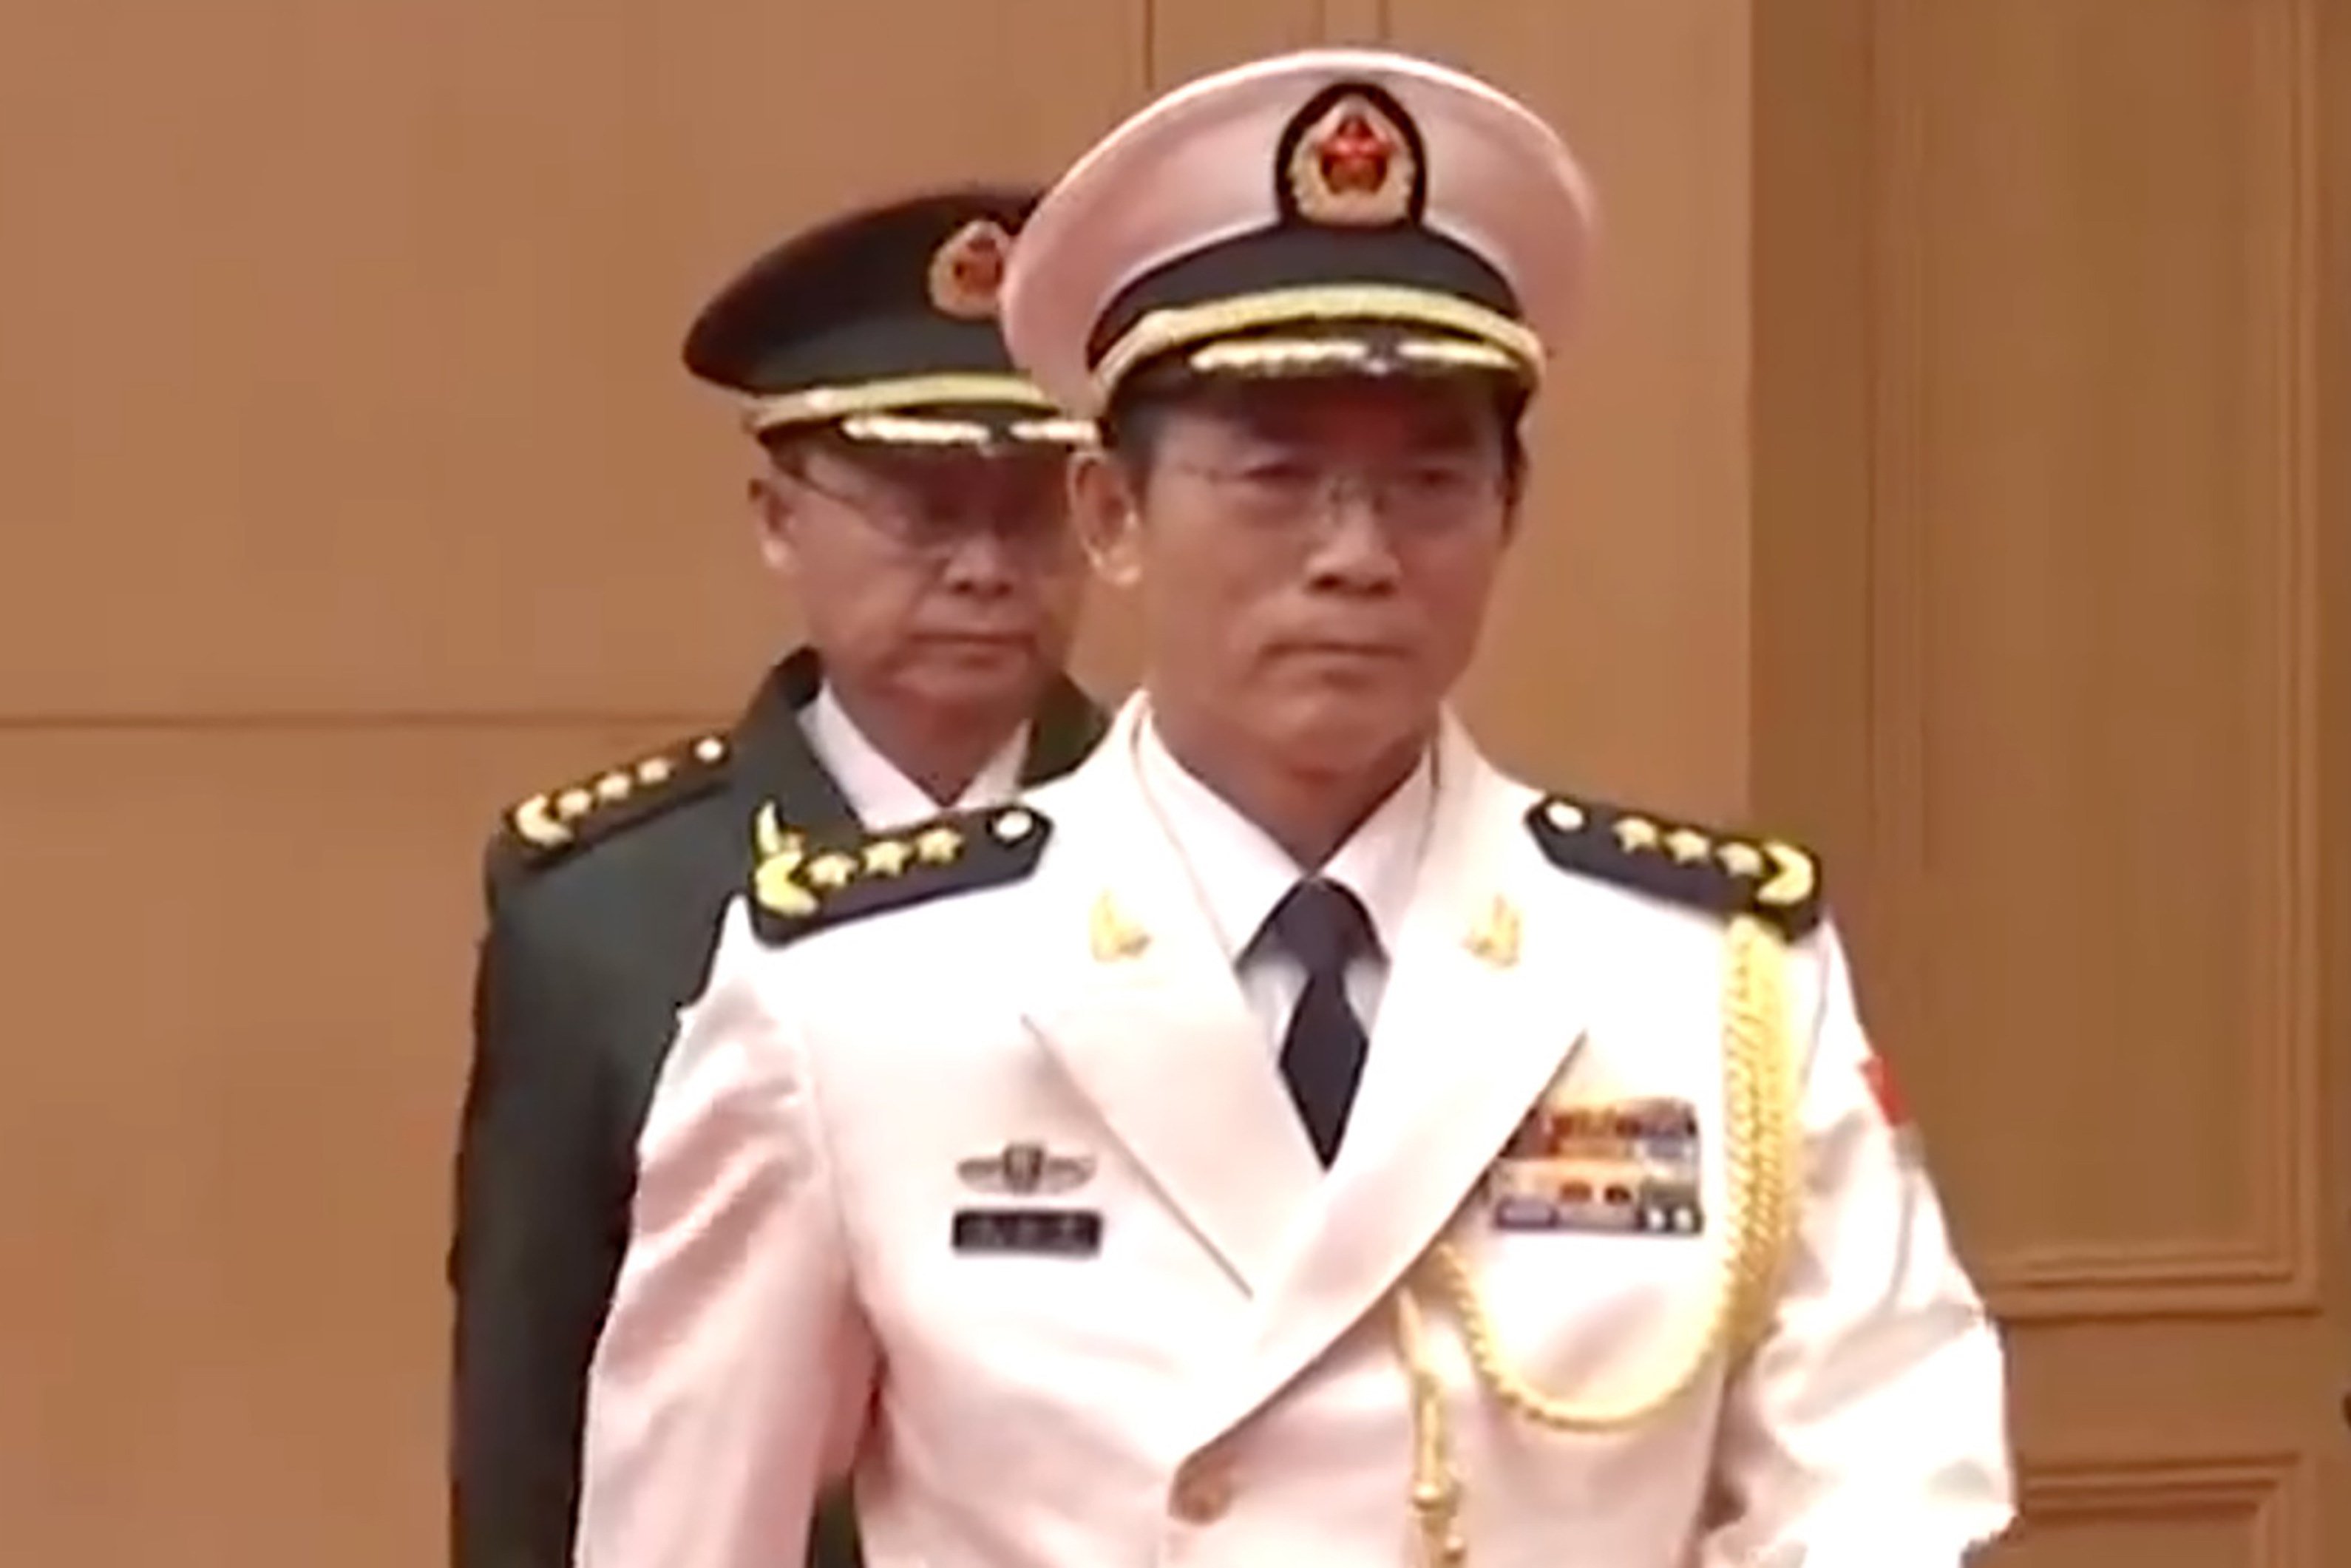 General Wang Renhua heads the commission that oversees the military’s courts, procuratorates and prisons. Photo: CCTV